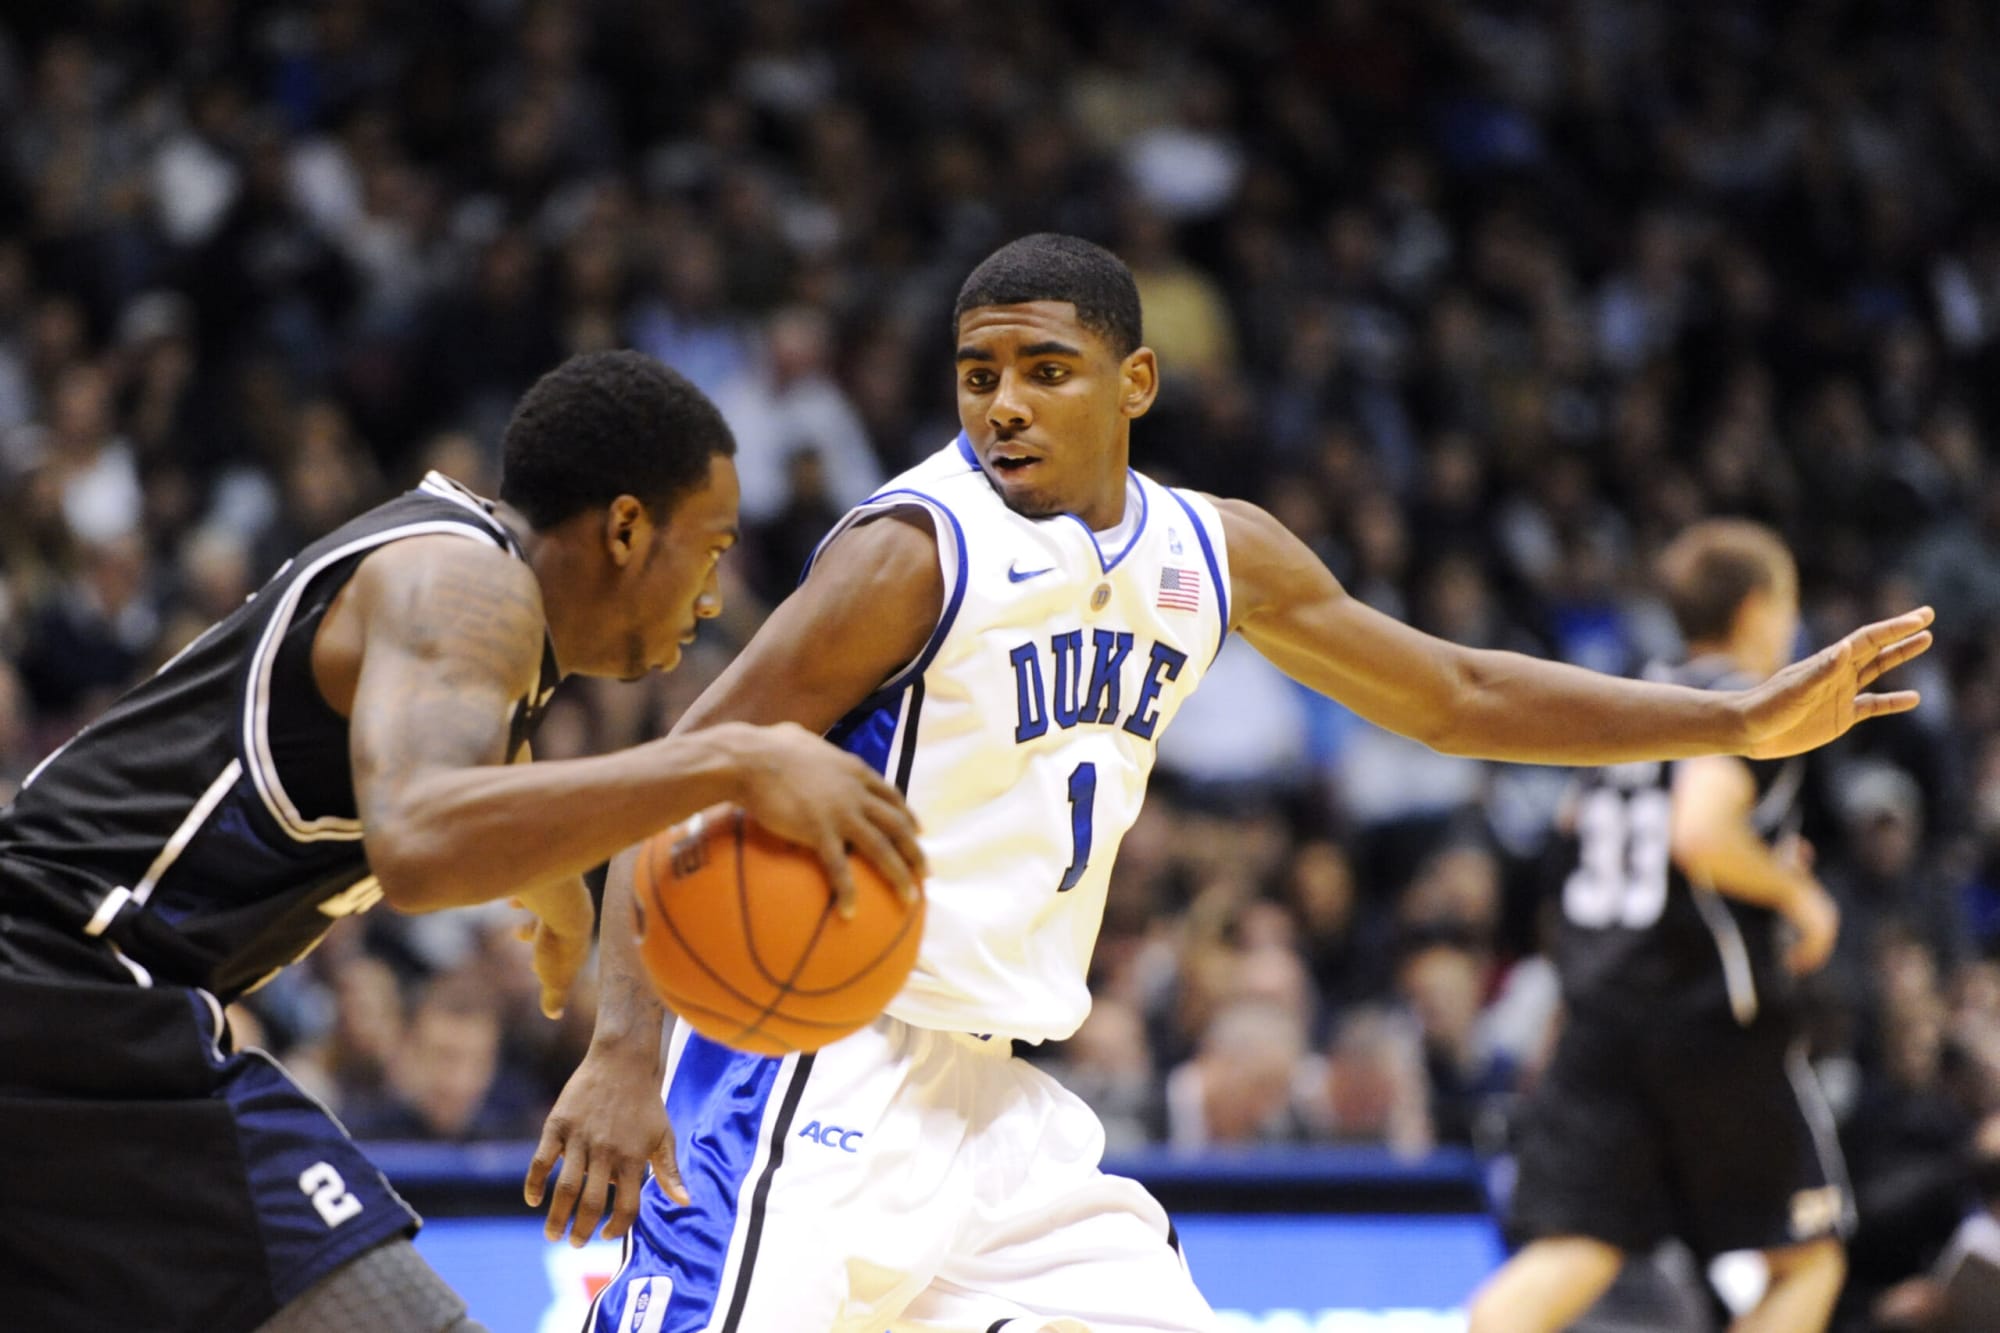 Kyrie Irving of the Duke Blue Devils looks on while taking on the